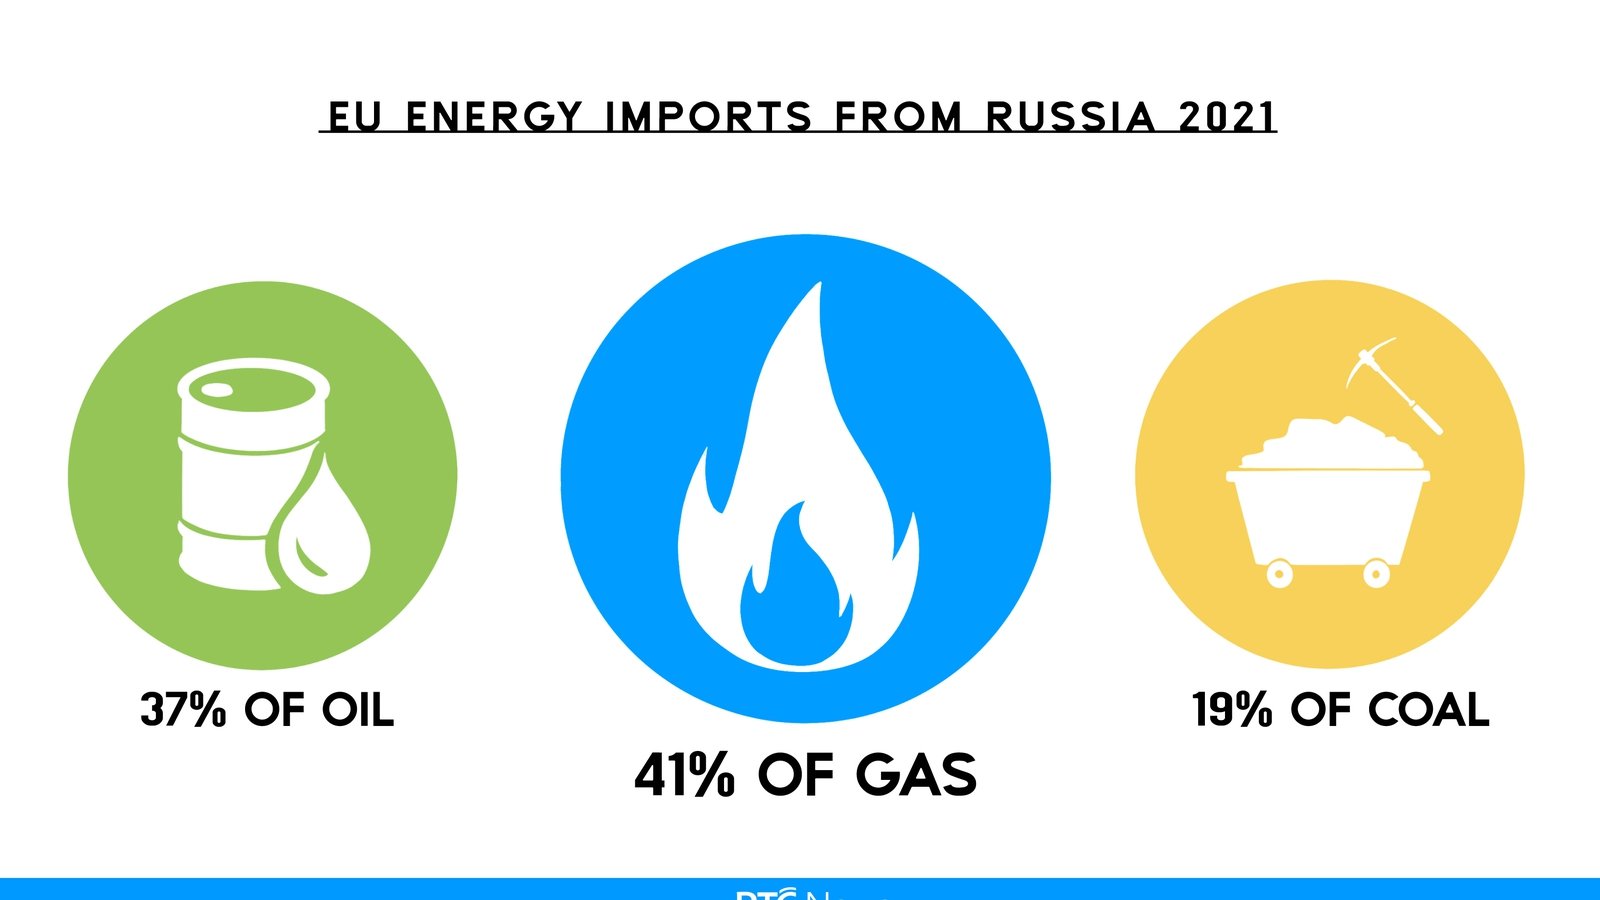 Image - EU Energy Imports from Russia 2021